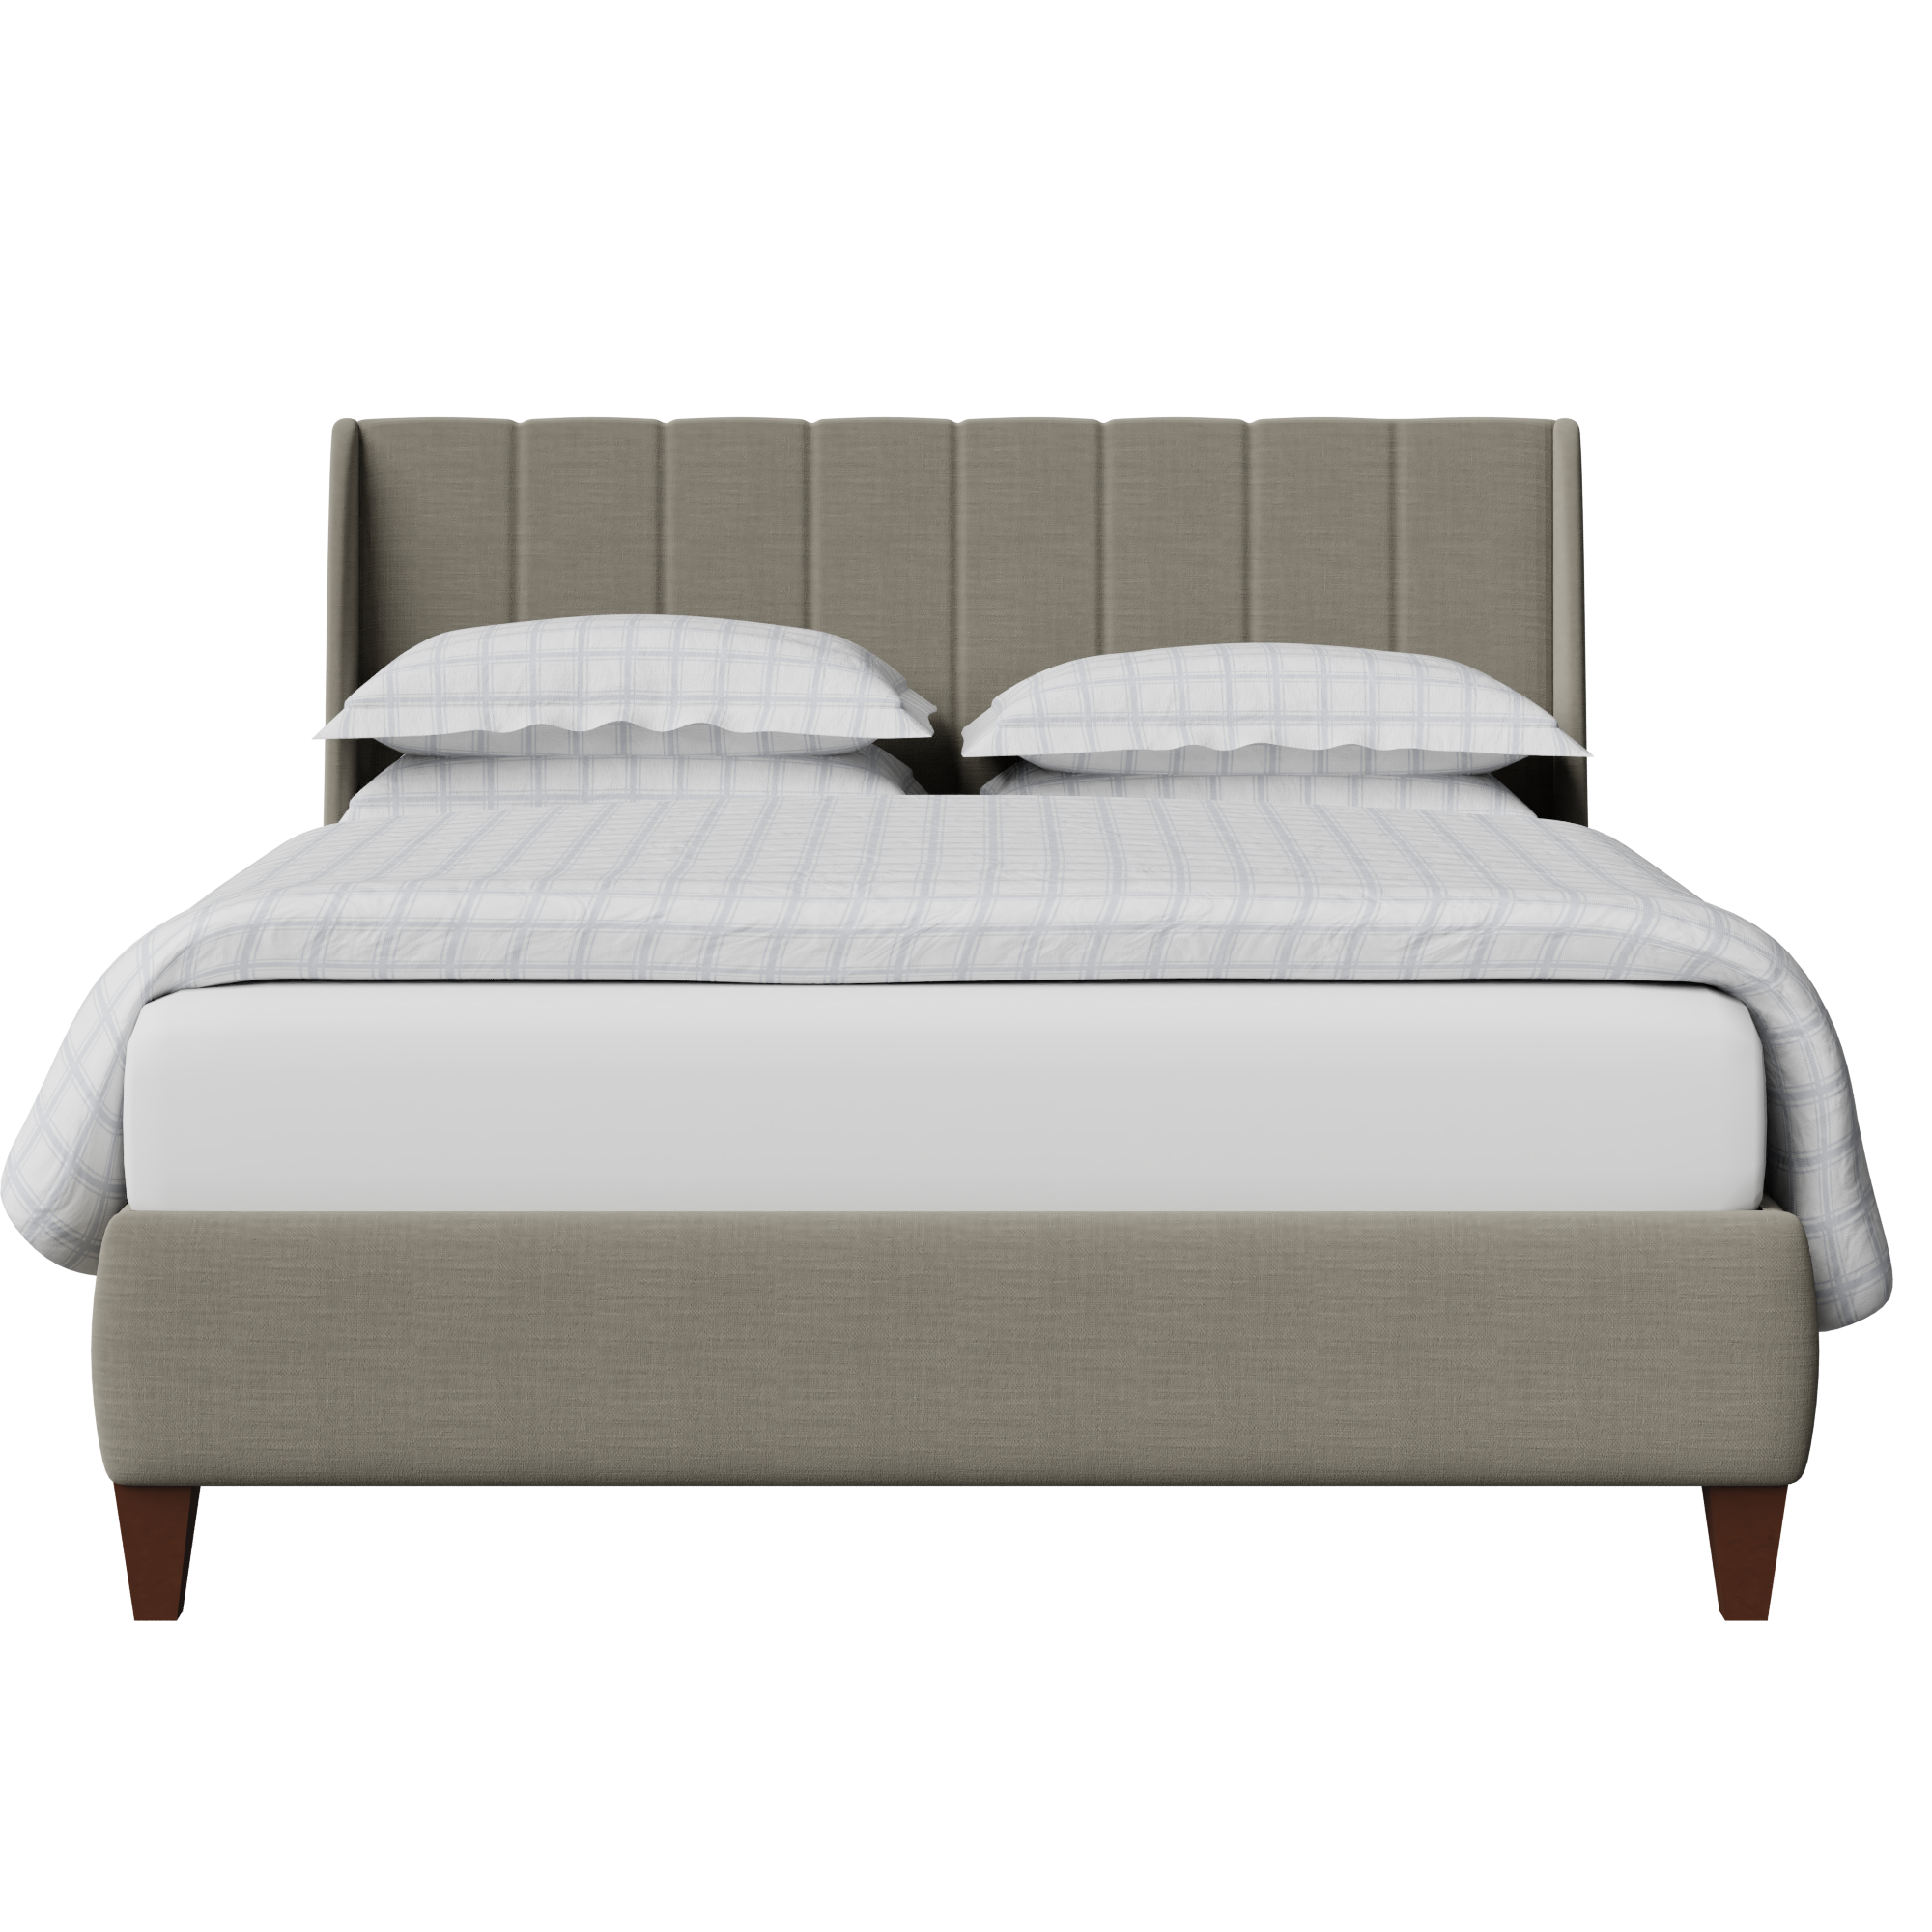 Sunderland Pleated upholstered bed in grey fabric